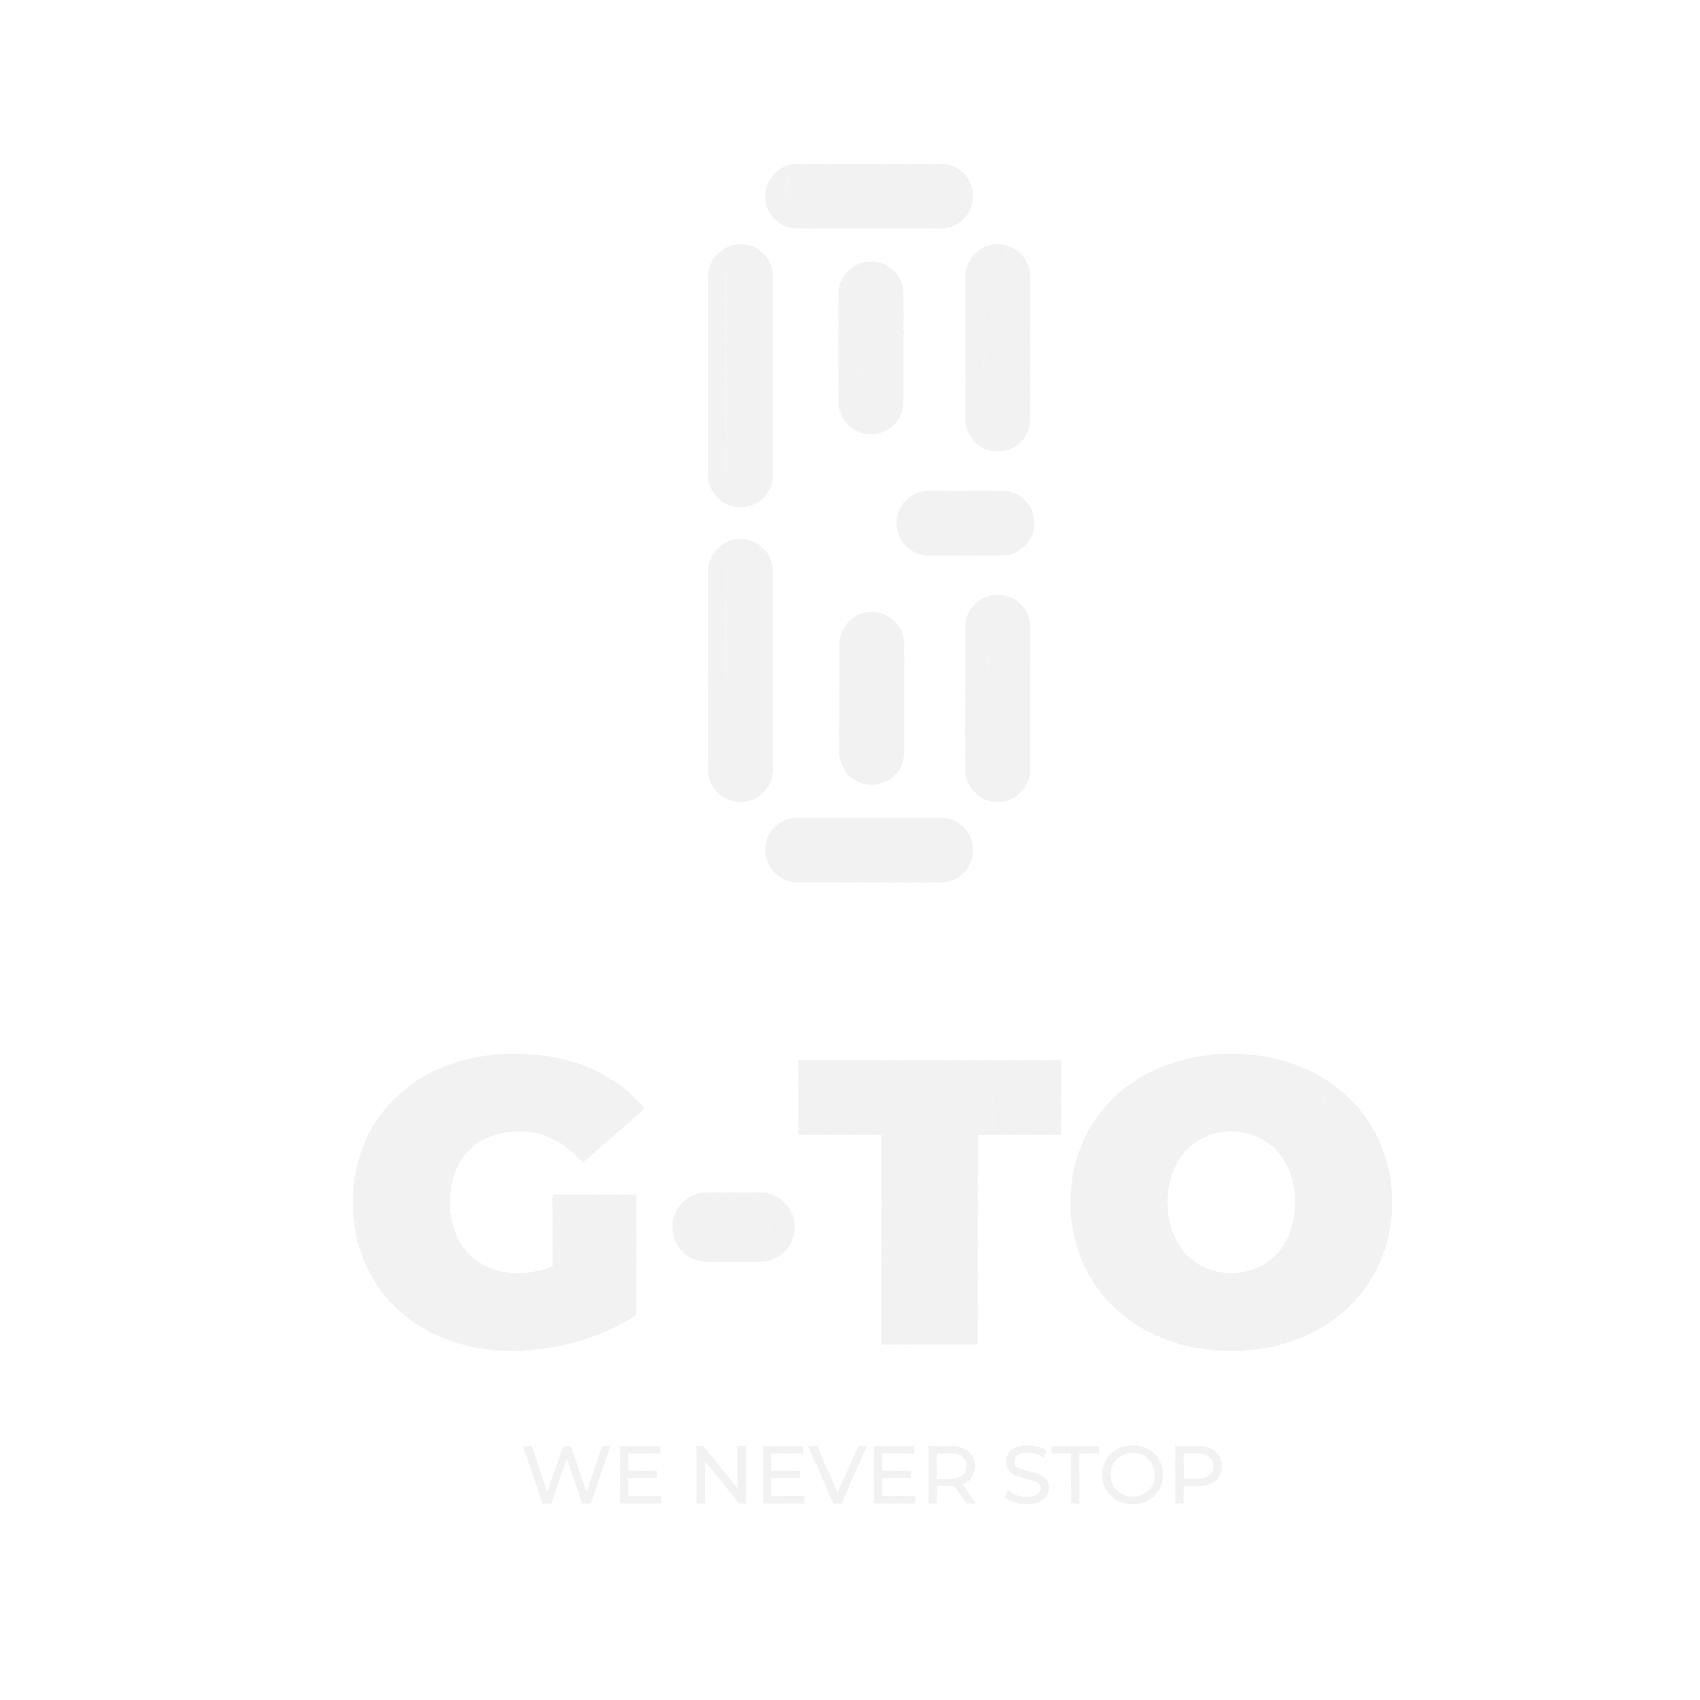 GTO_weneverstop giphyupload clothing madeinitaly weneverstop Sticker